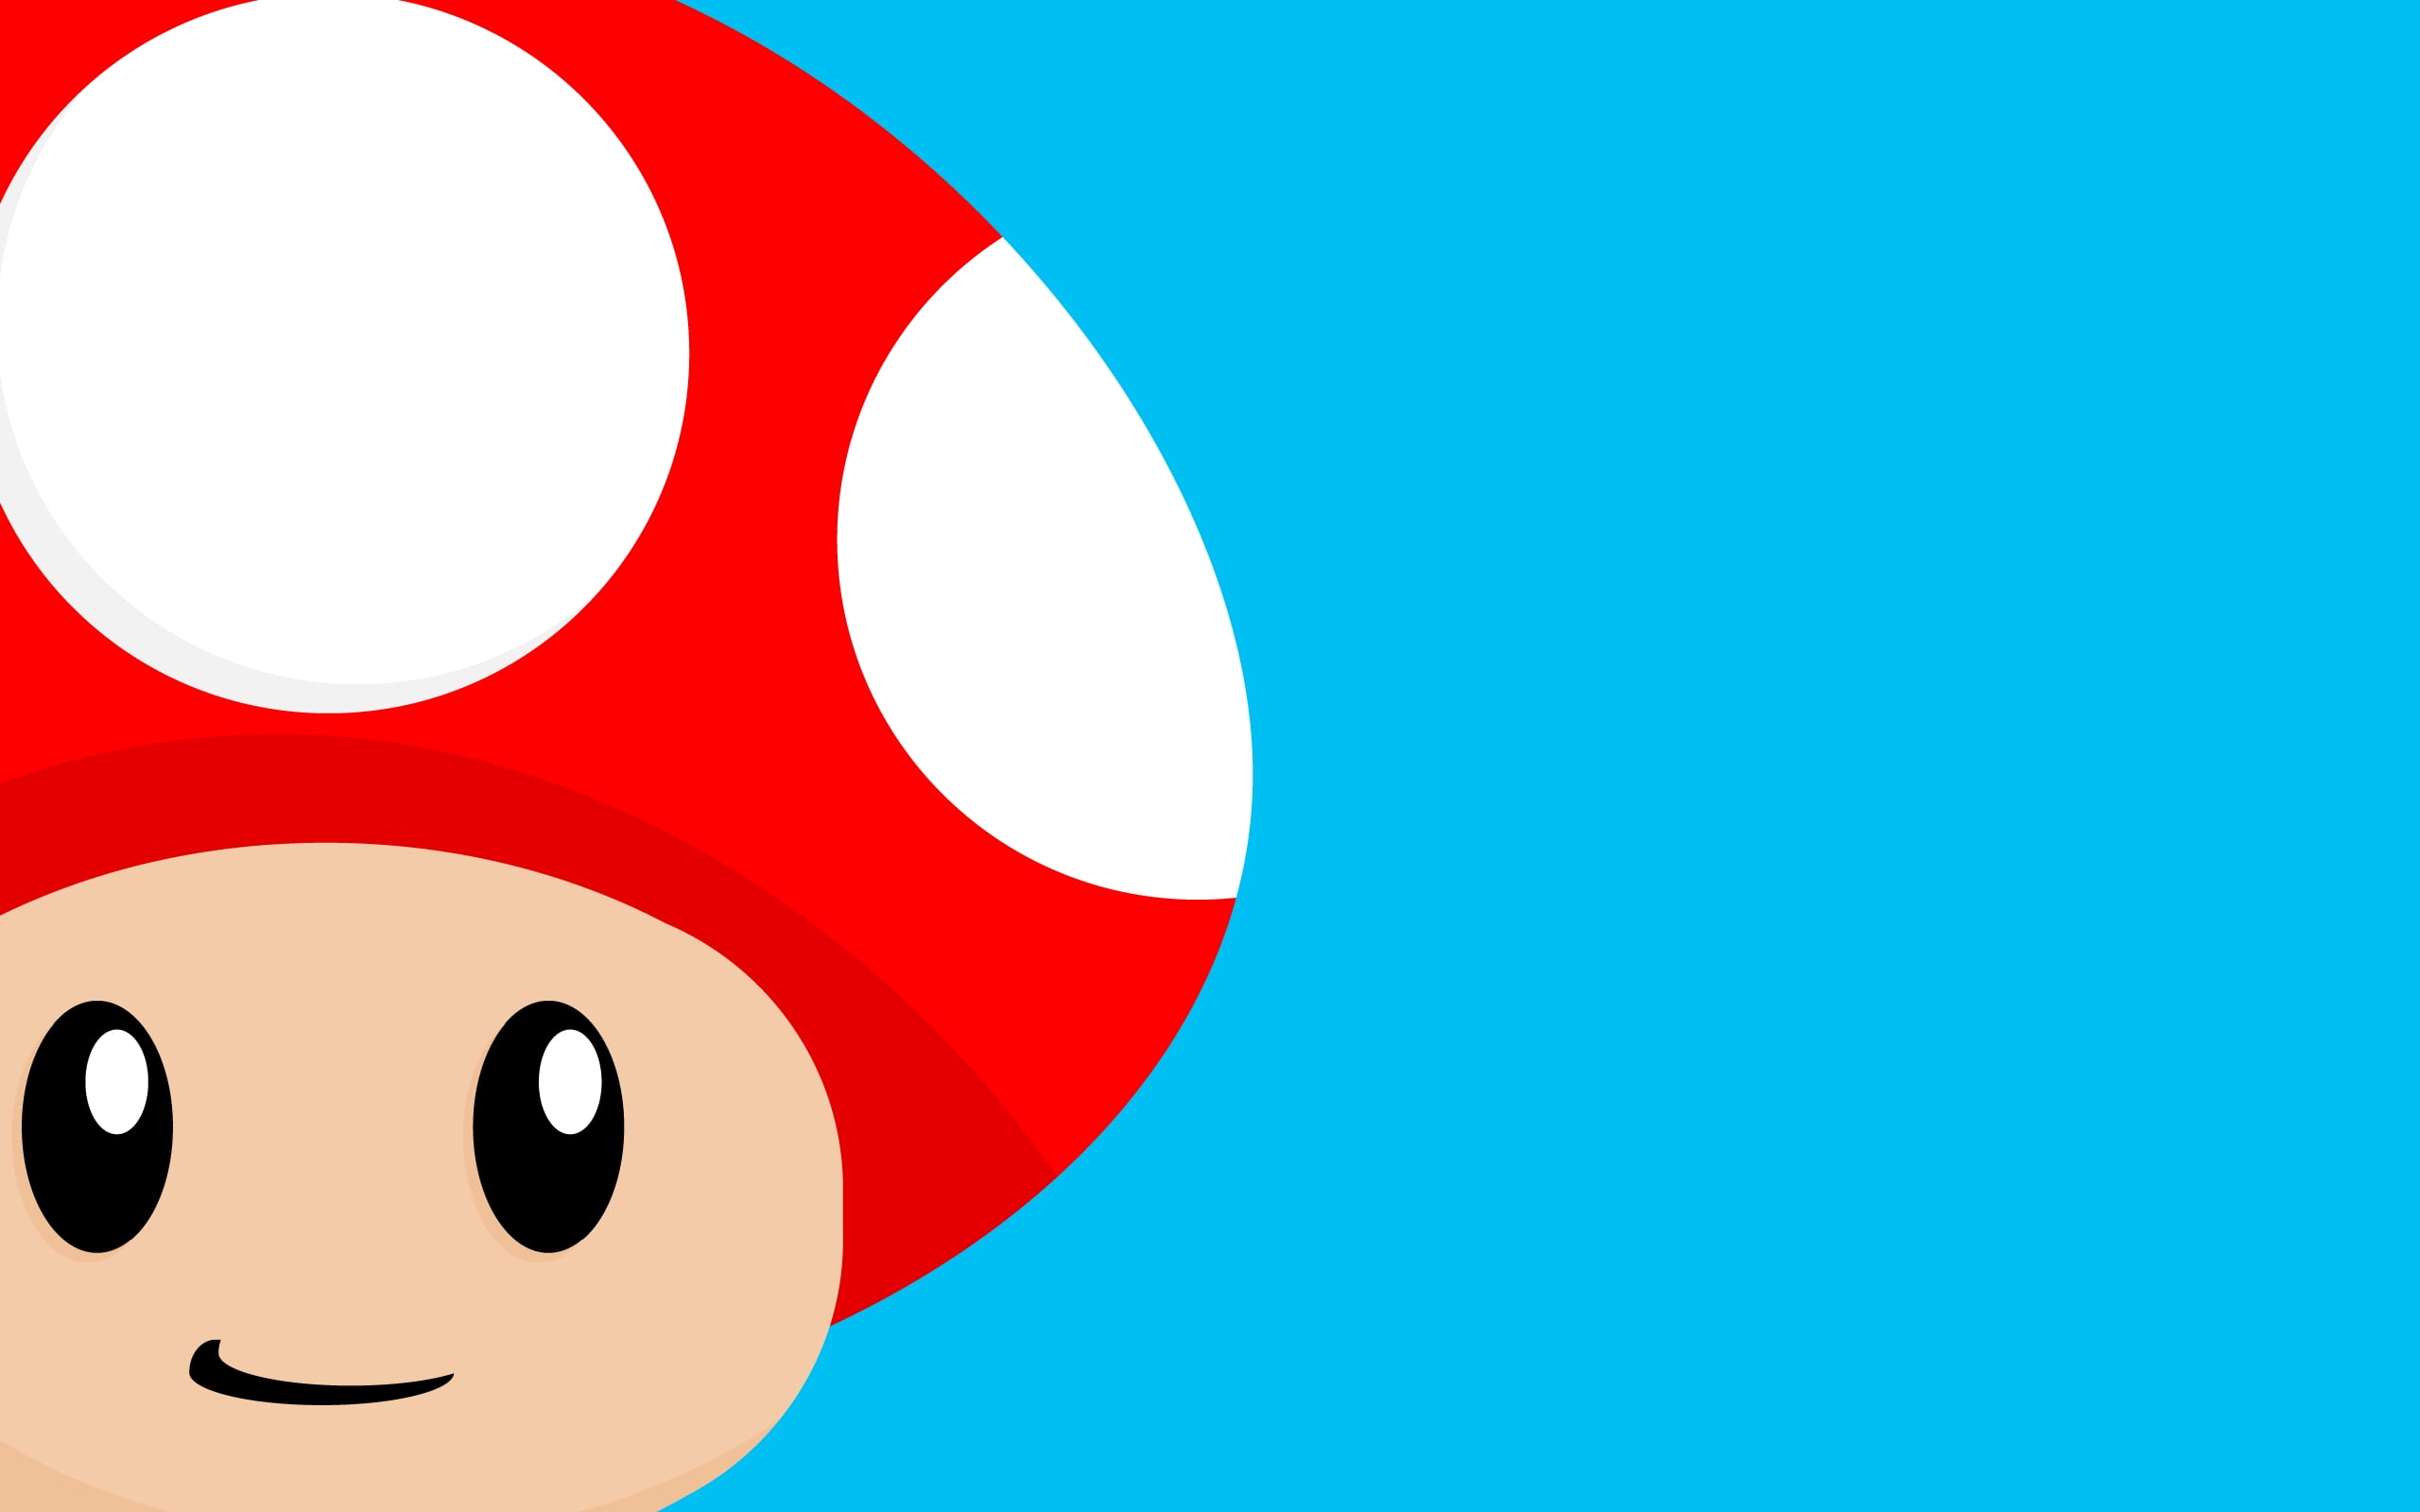 Toad wallpaper by Orbitingamer  Download on ZEDGE  c81b